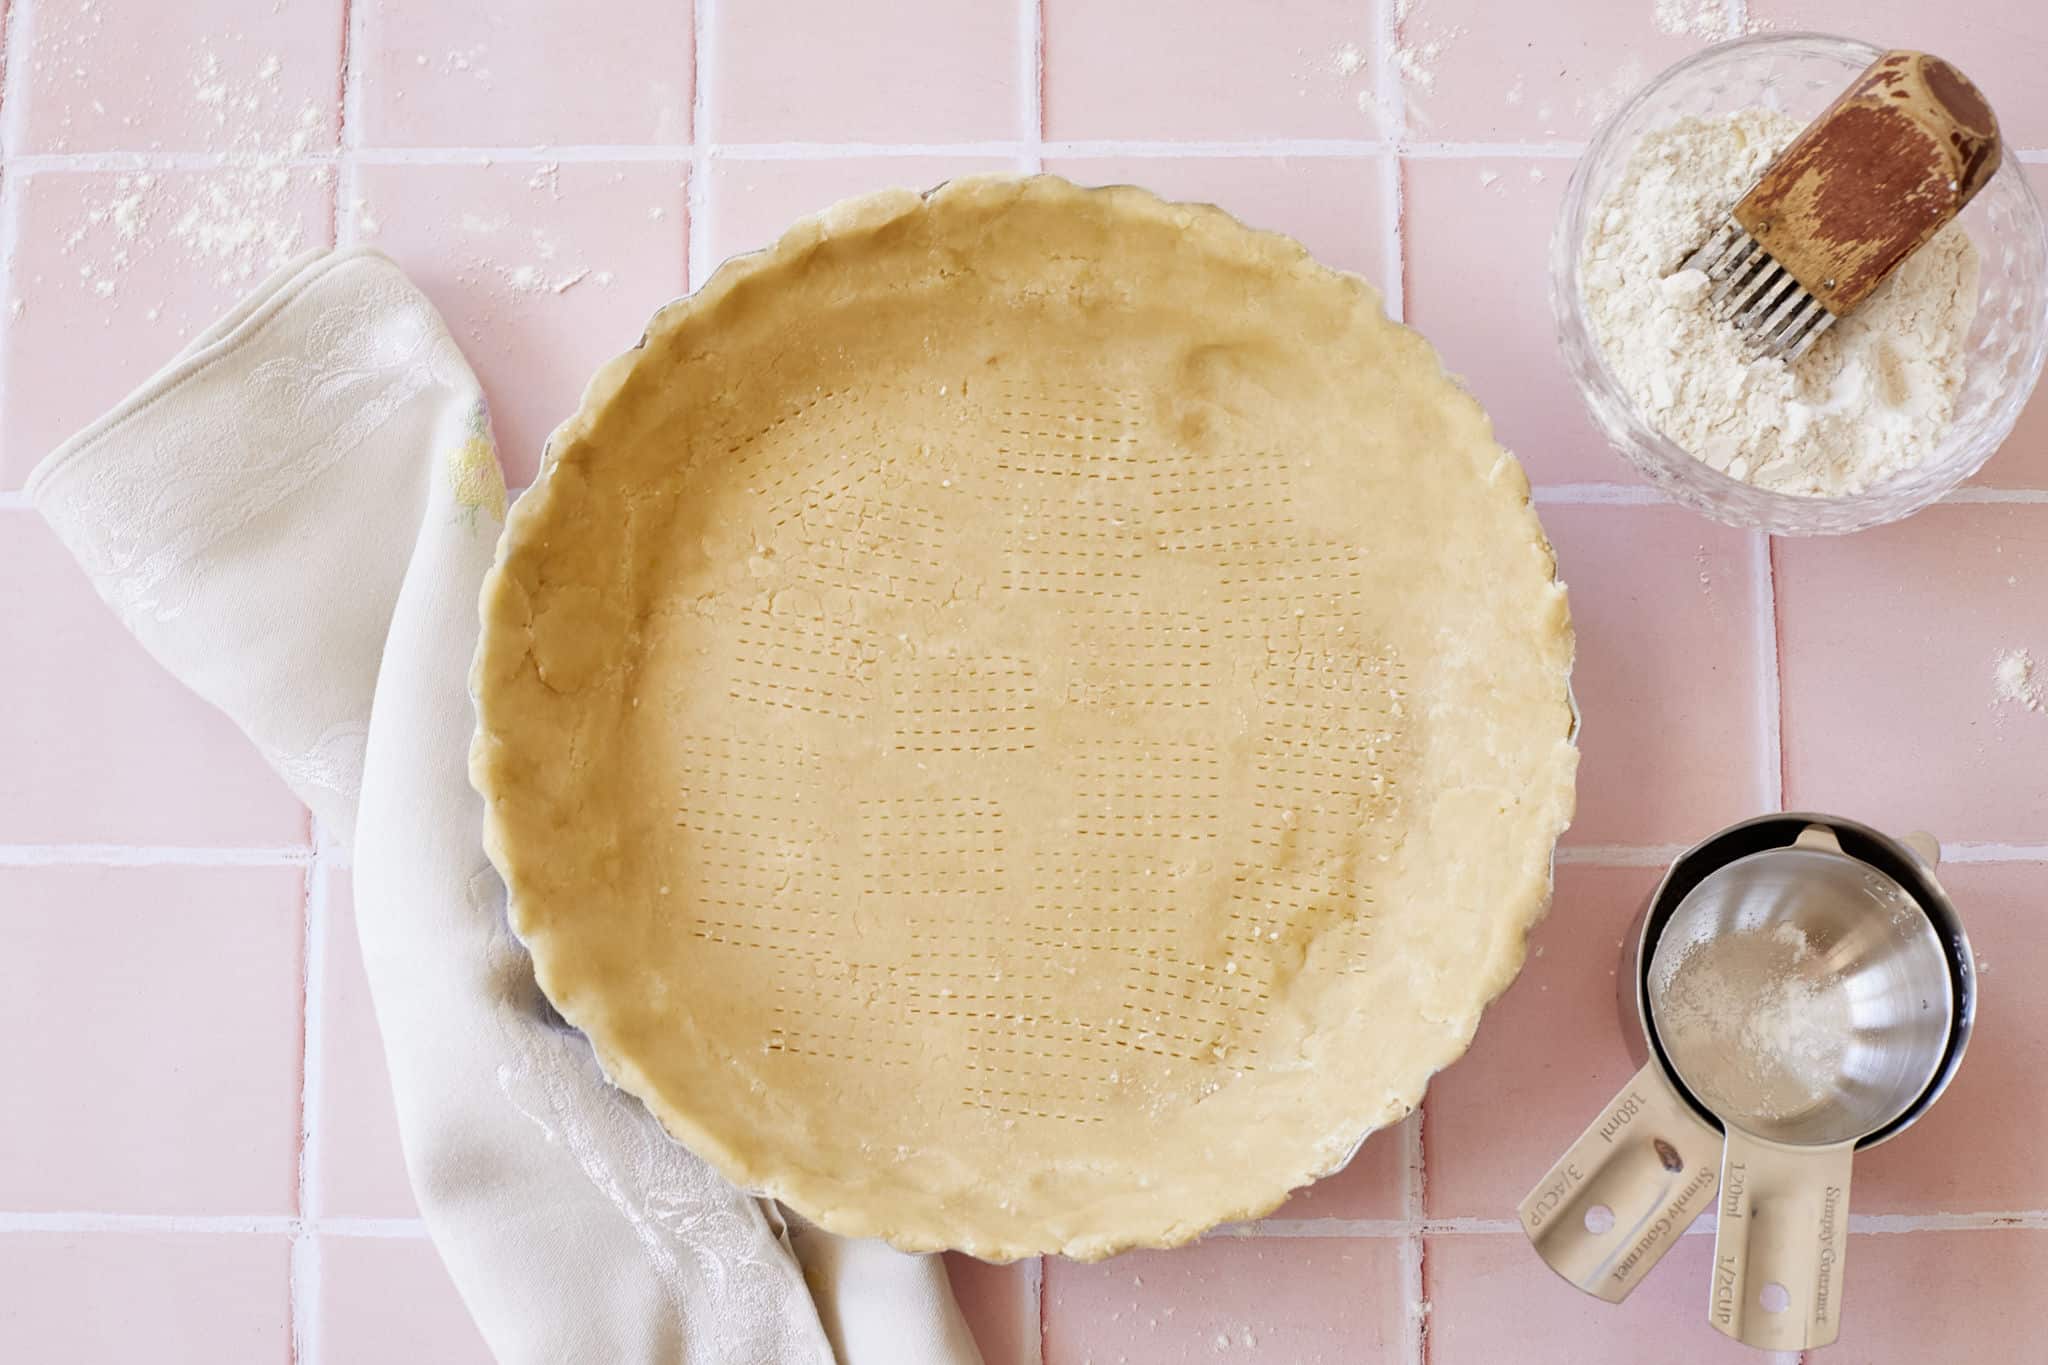 Buttermilk pie crust pressed into a pie tin, next to a glass bowl of flour with a pastry mixer inside and metal measuring cups, laid out on a pink tile counter top.